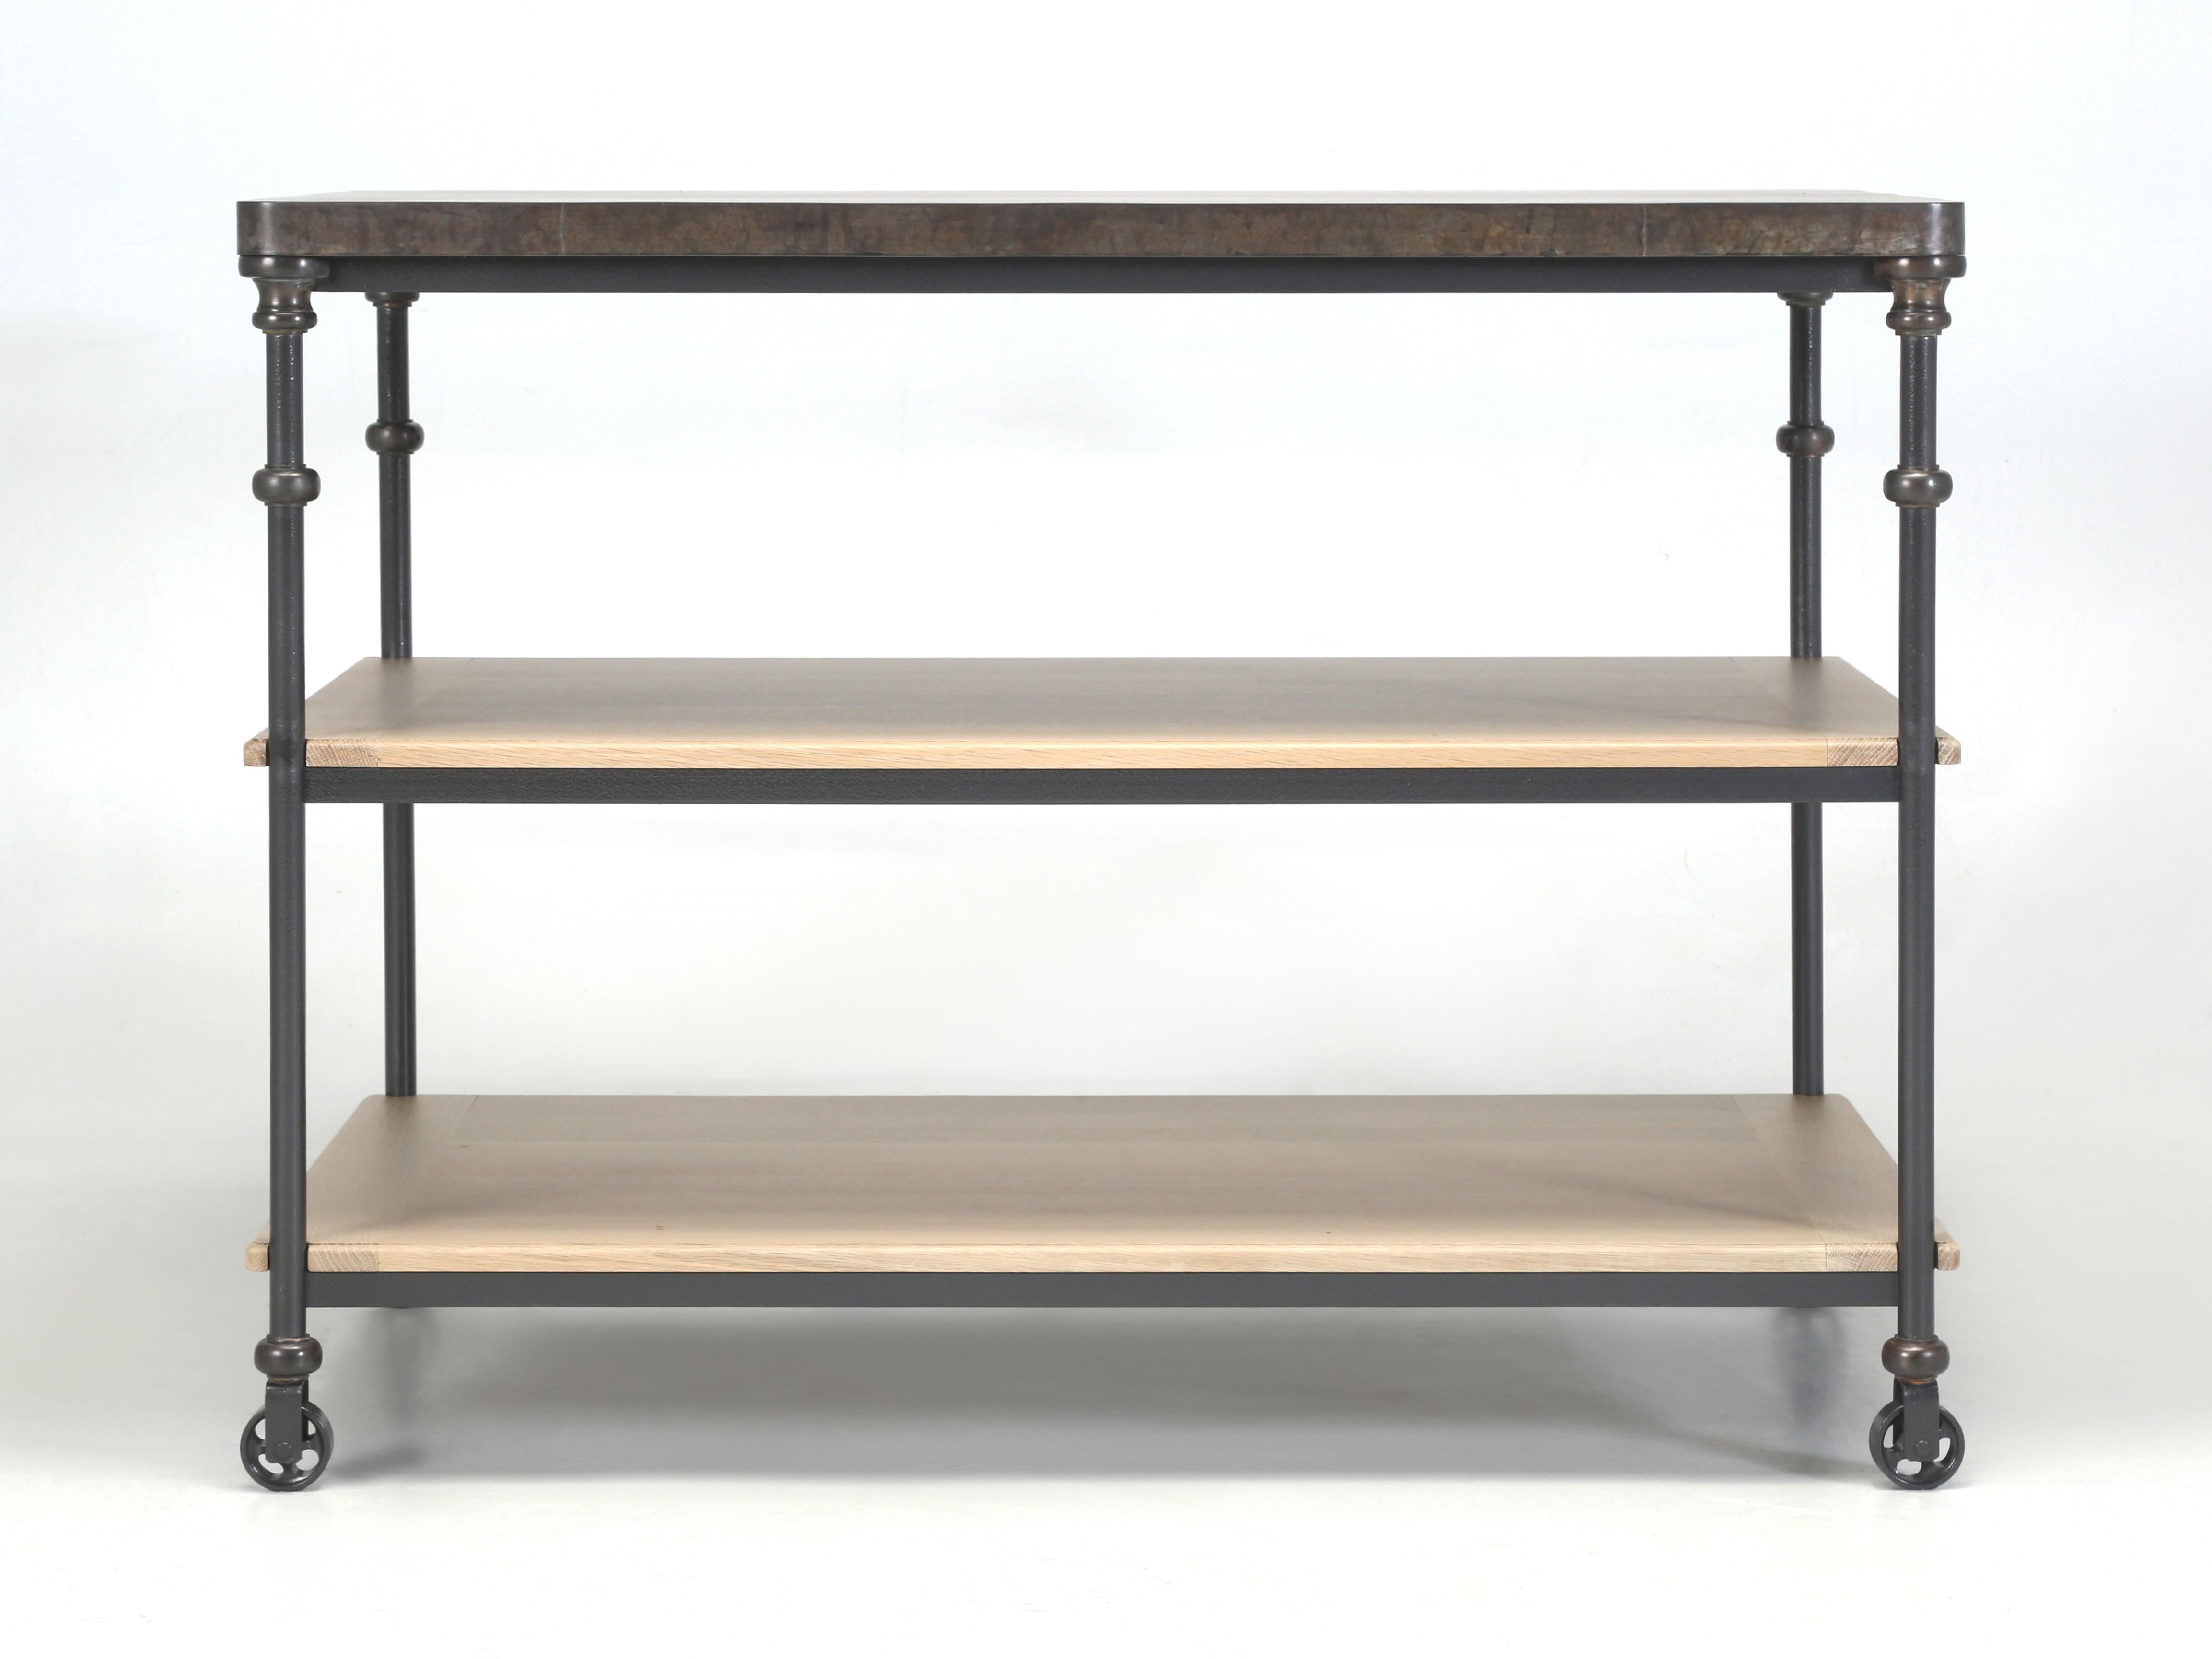 French Industrial Inspired Kitchen Island Made in Chicago by Old Plank and available in any dimension, top material and numerous metals for the base and donut shaped connectors. We have been making Country French or European Industrial Inspired